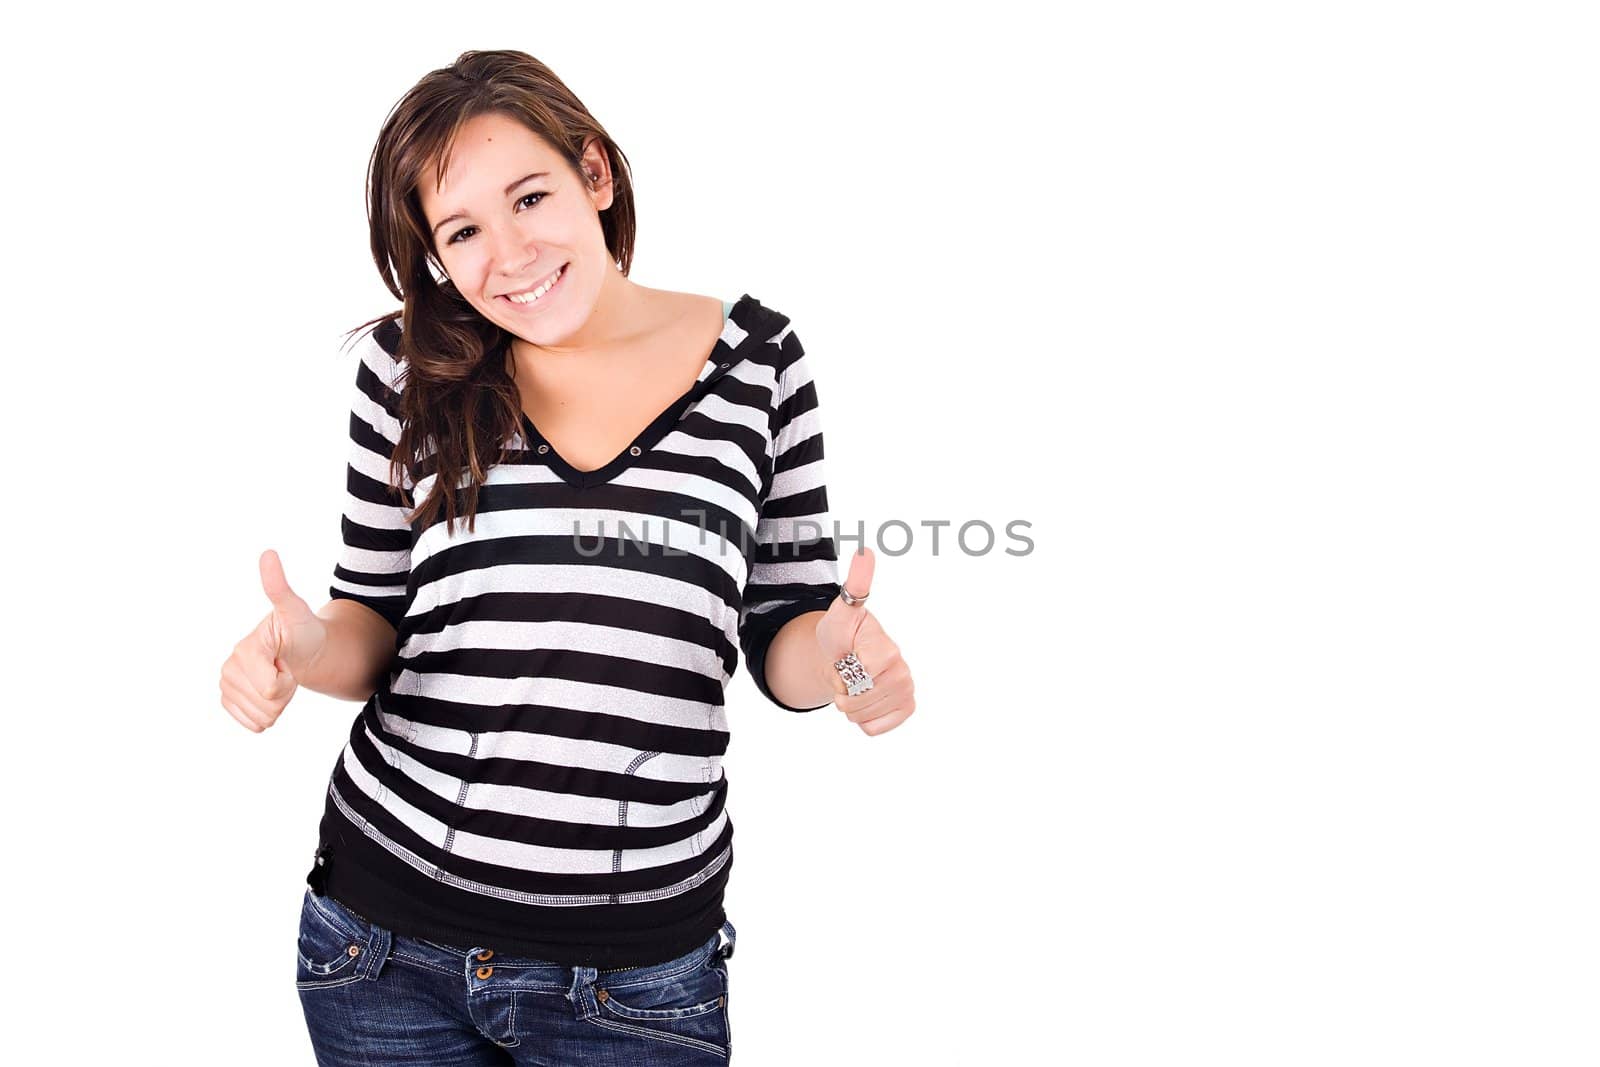 Young woman smiling with thumbs up. Copy space.